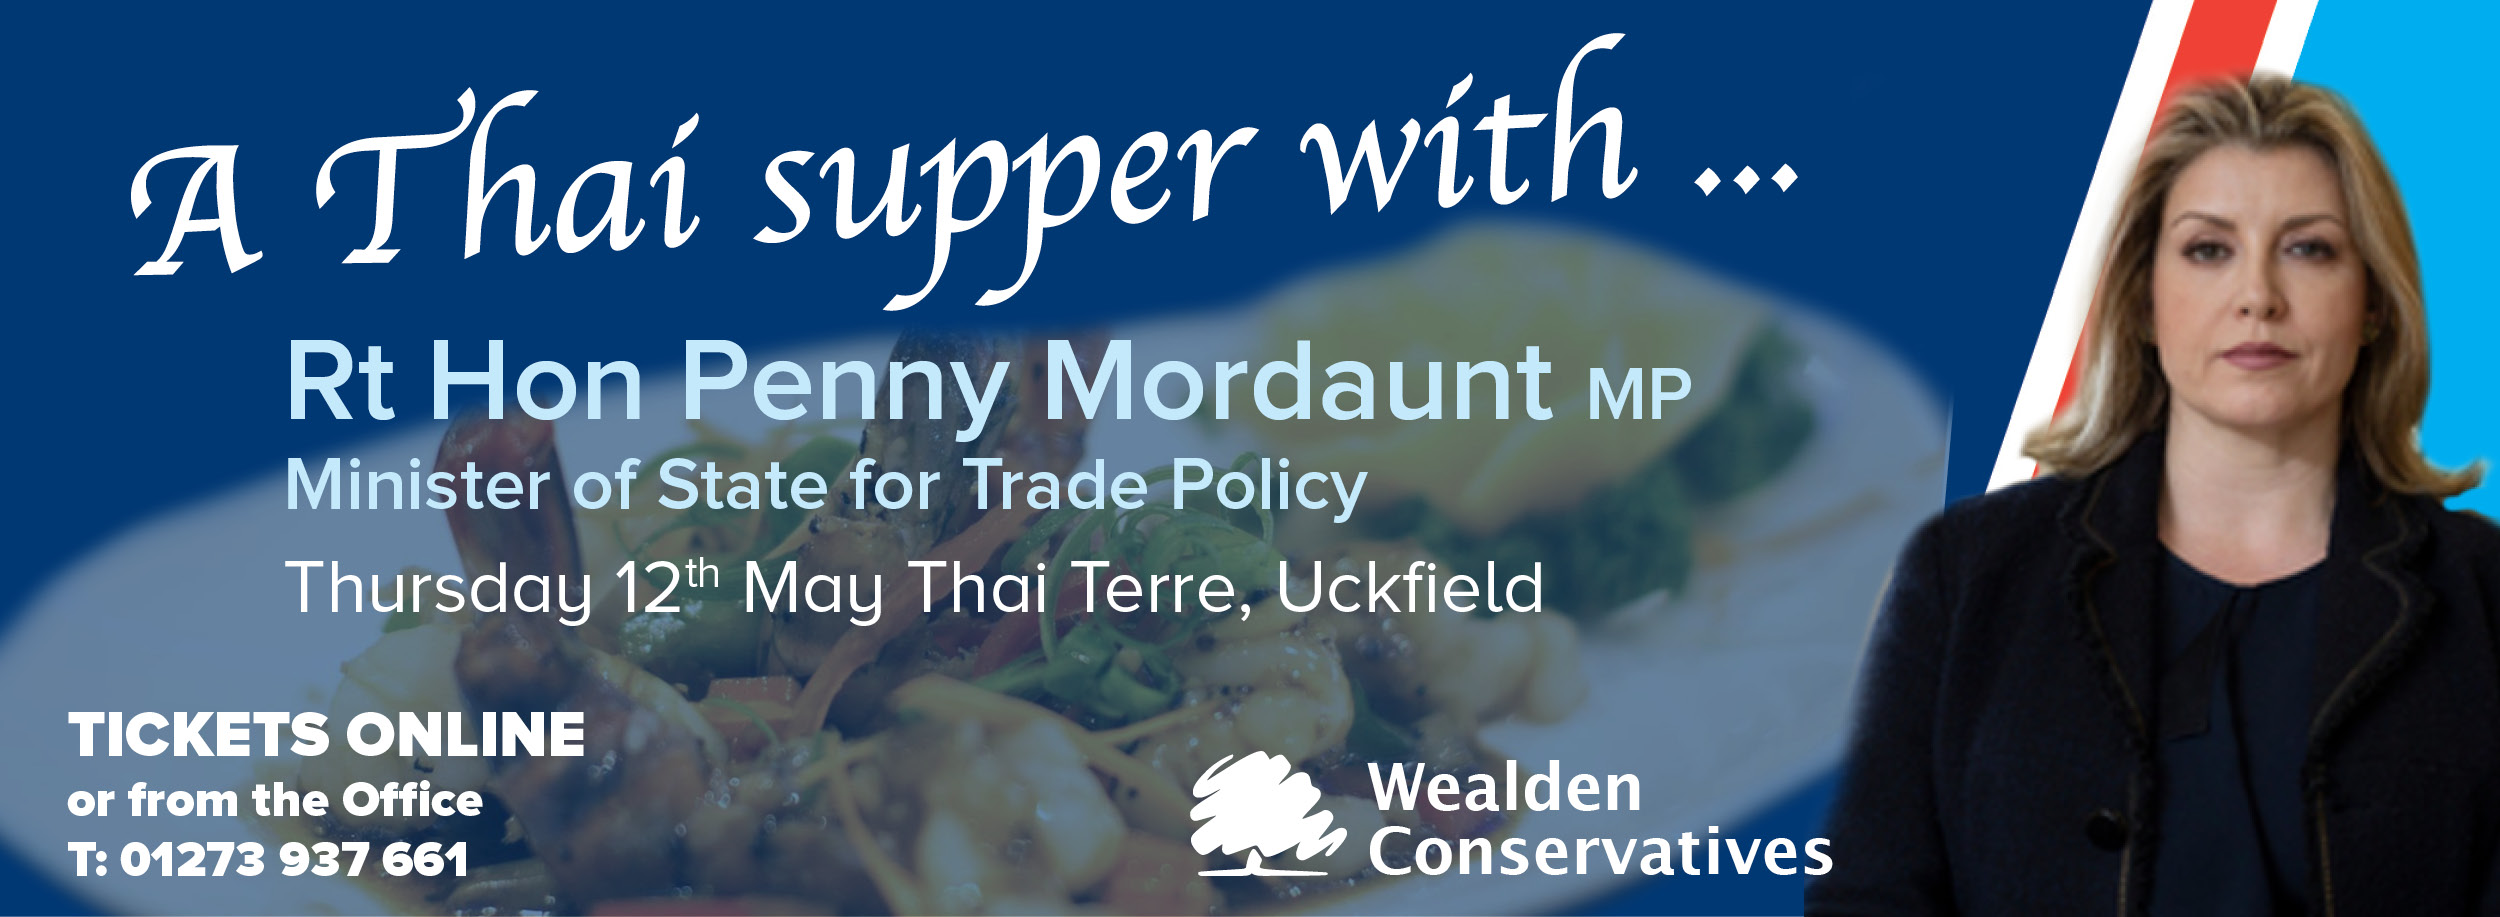 Association Thai Supper with Penny Mordaunt MP